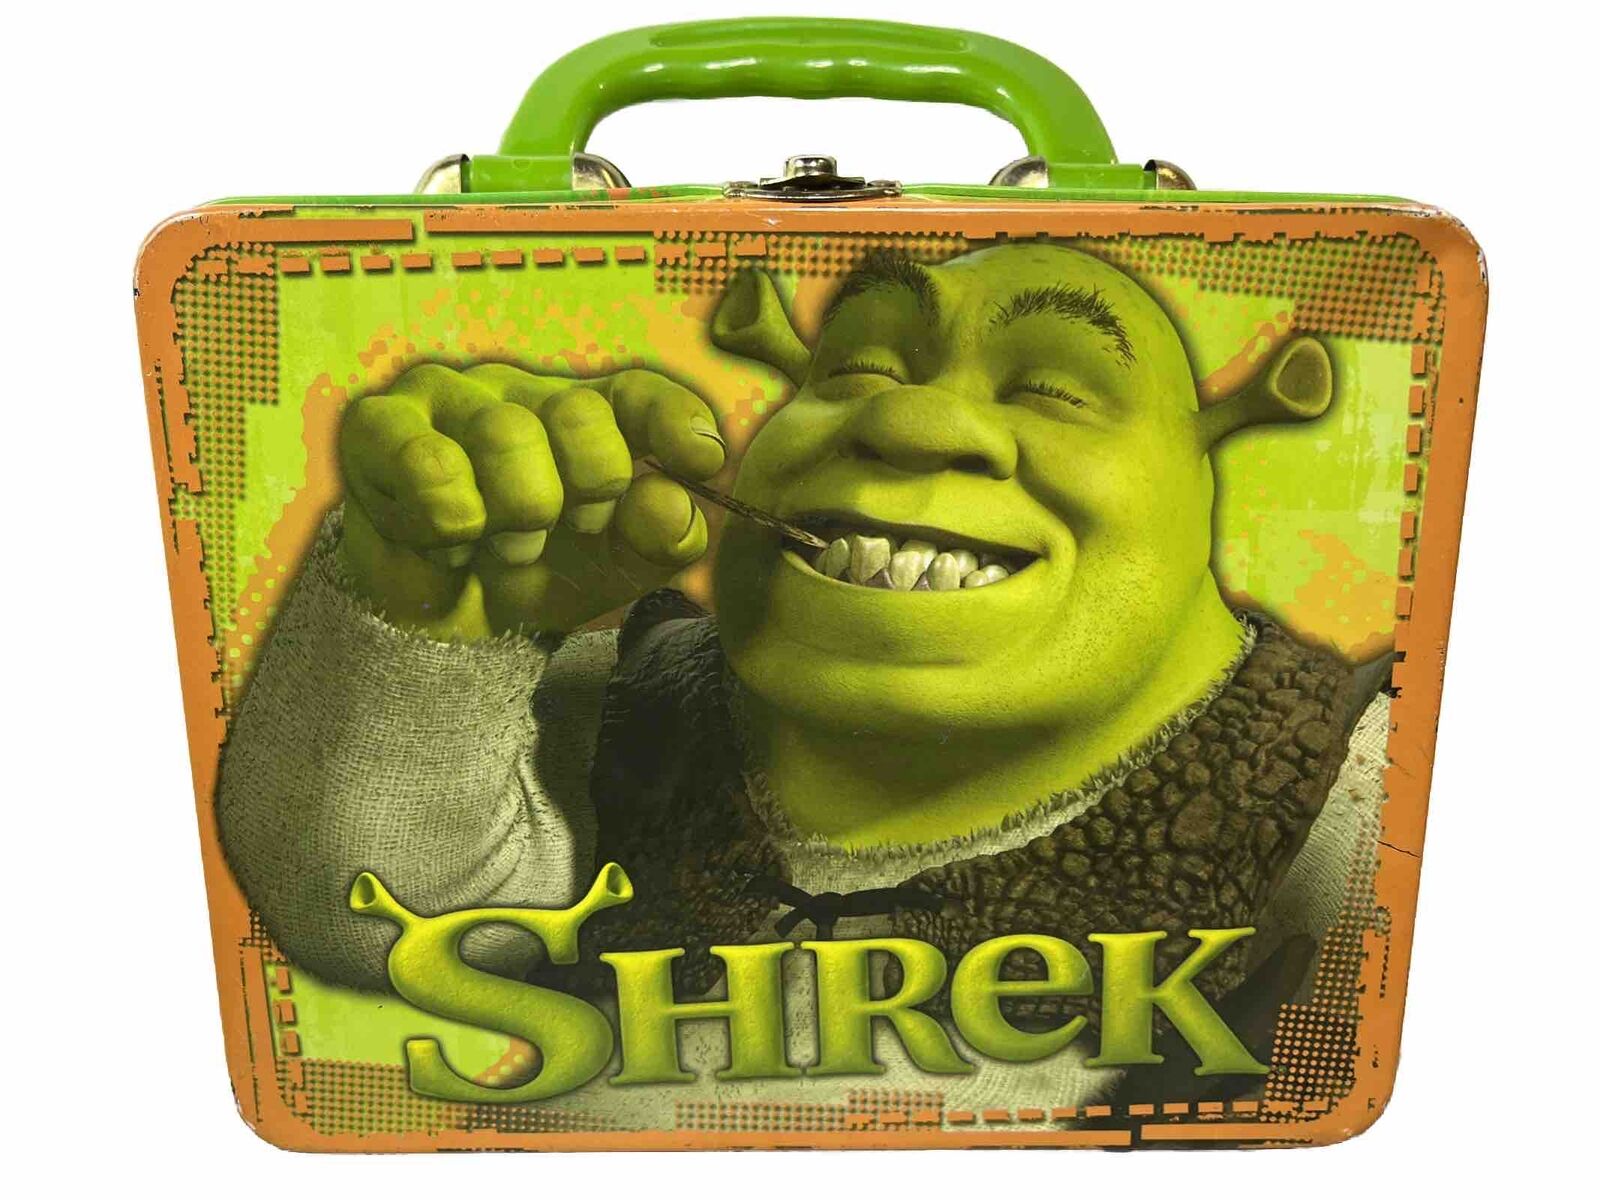 Shrek 2004 Vintage Lunch Box EMPTY Collectable Tin Container Decor